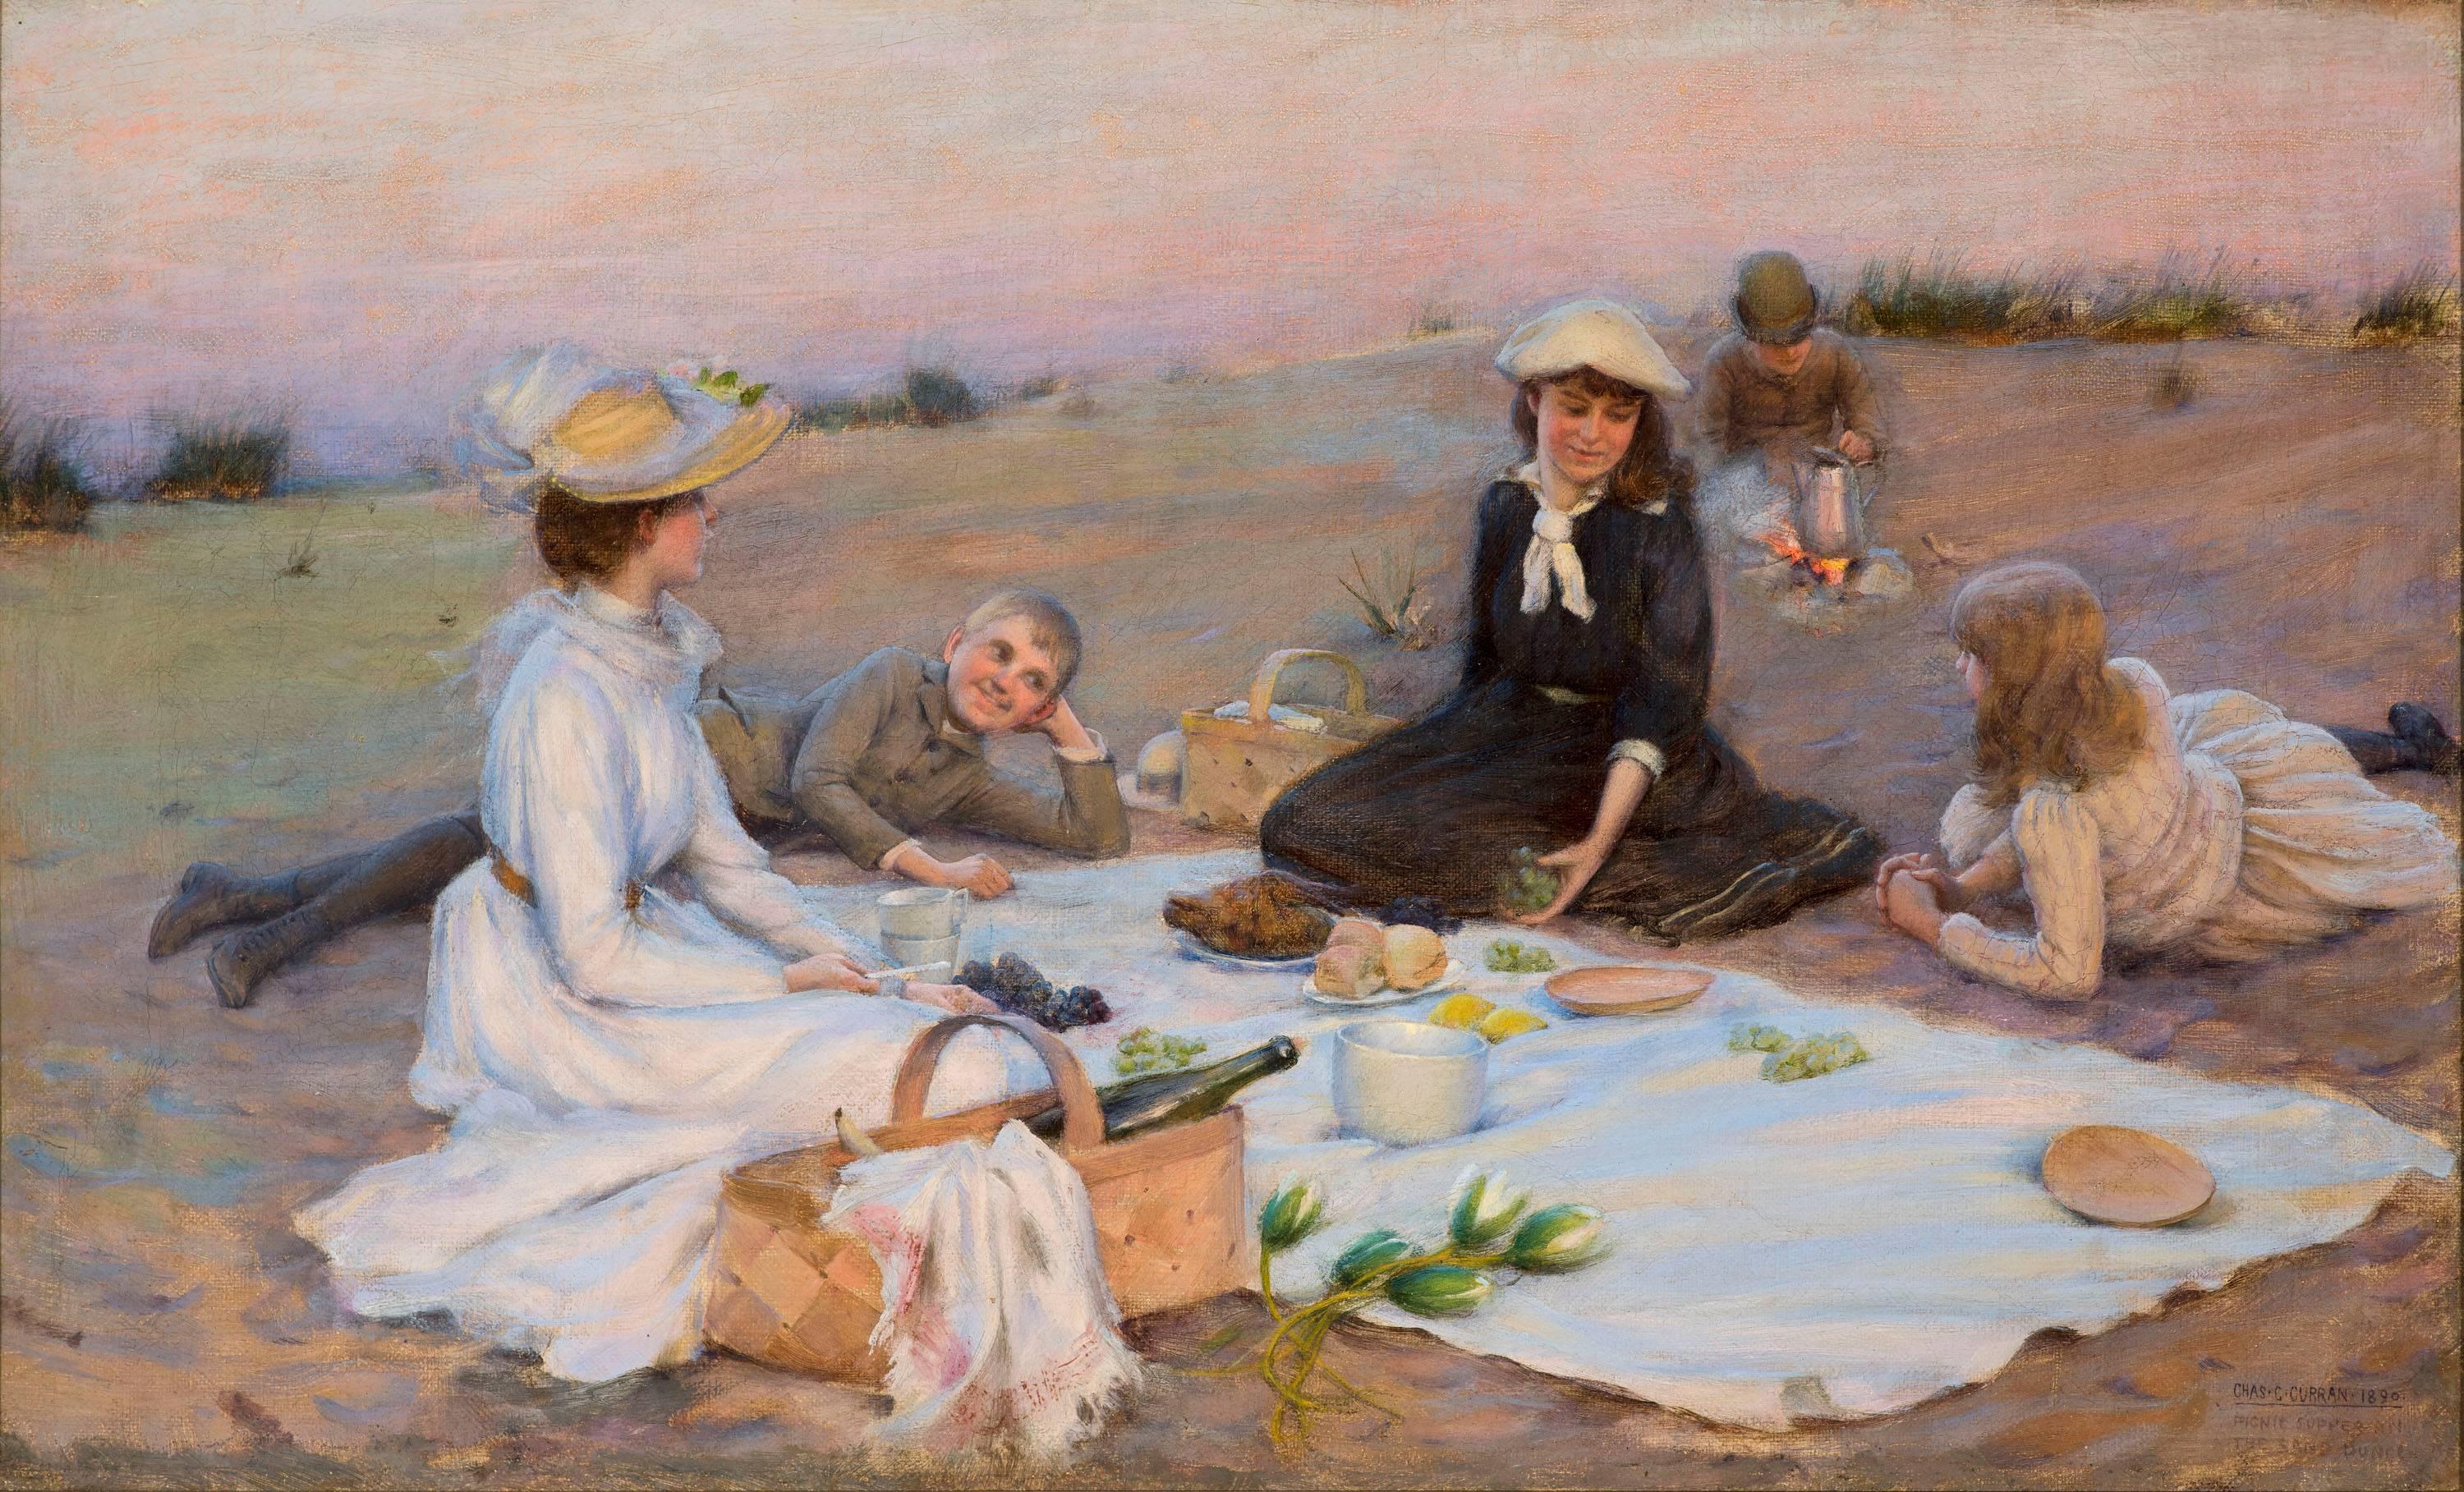 Picnic Supper on the Sand Dunes - Painting by Charles Courtney Curran